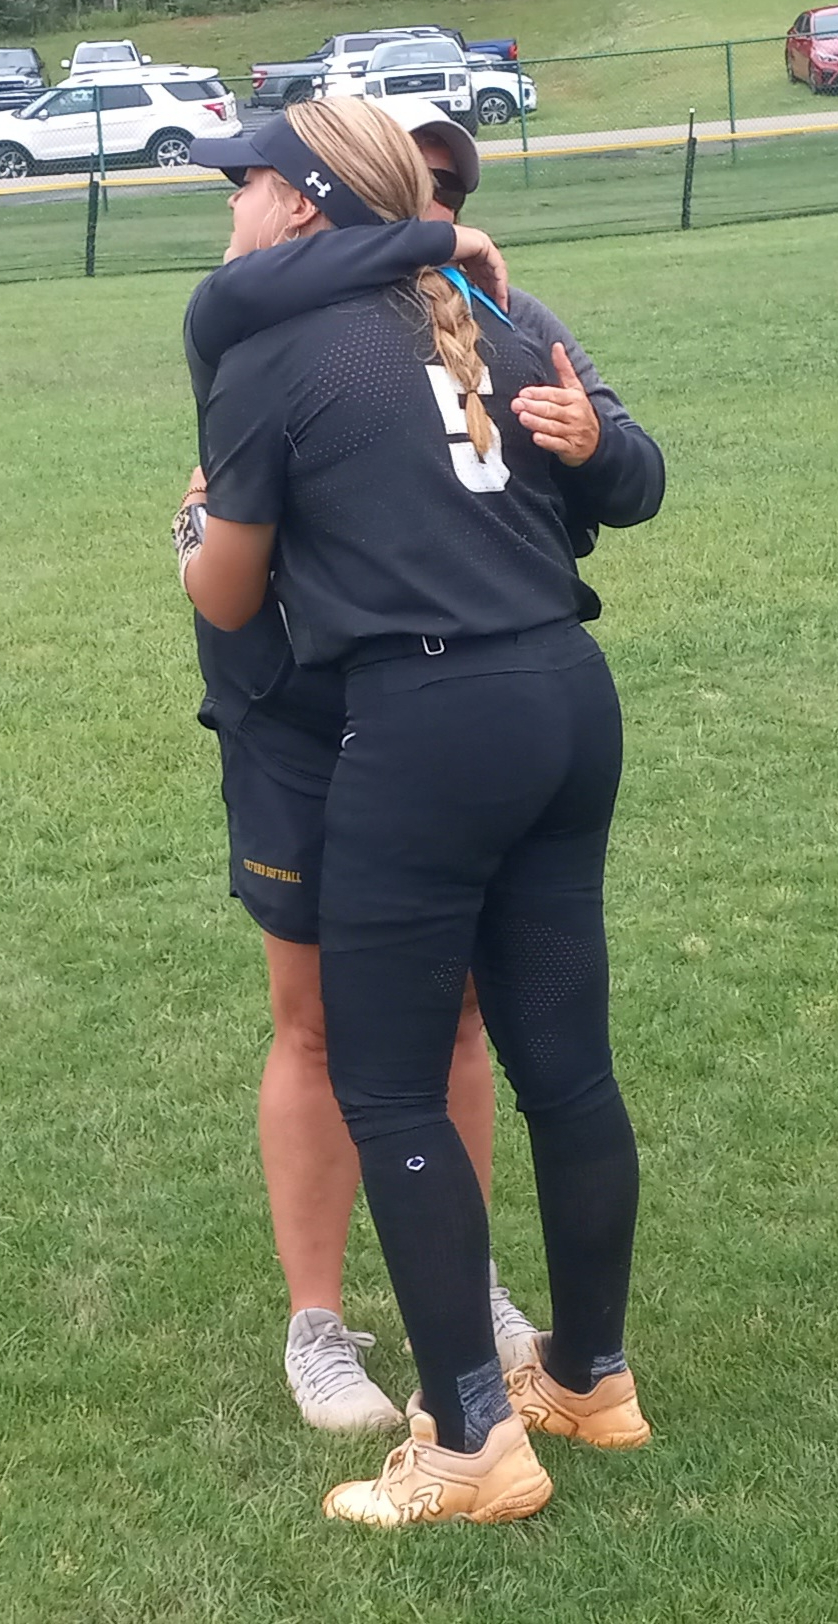 Oxford coach Wendy McKibbin and pitcher Berkley Mooney embrace after the Yellow Jackets lost to Athens in Friday’s state elimination game at Oxford Lake Park. (Photo by Joe Medley)